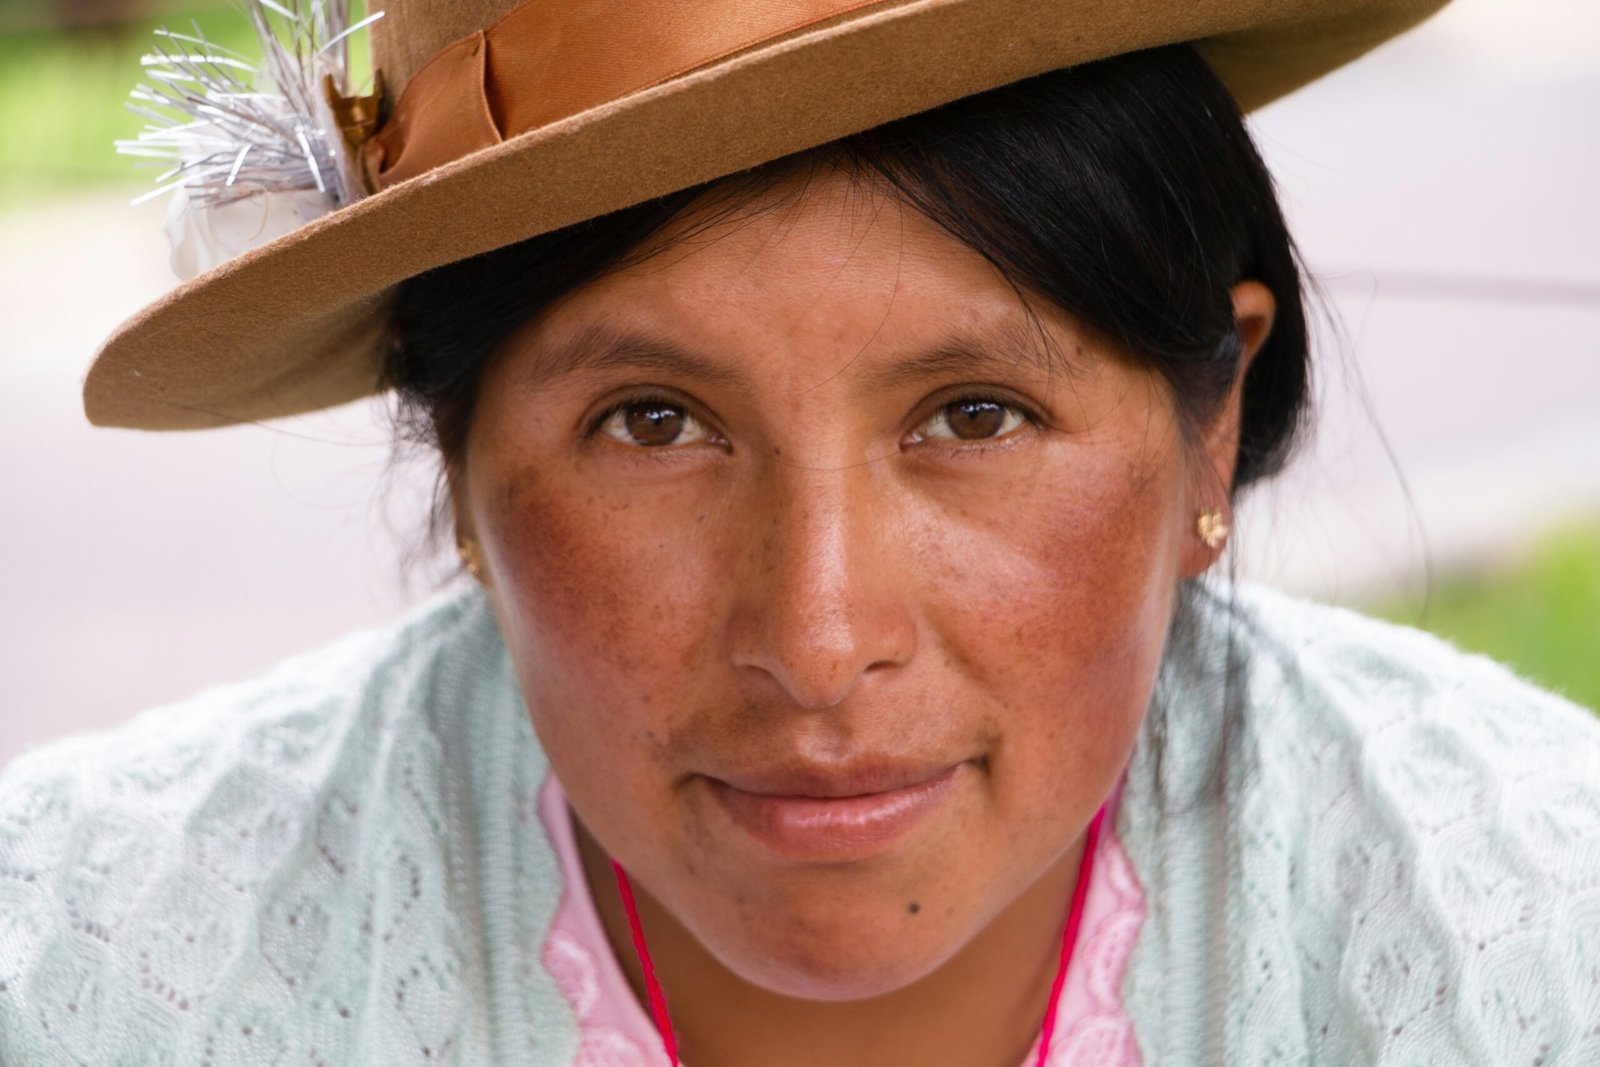 a woman wearing a brown hat and a pink shirt